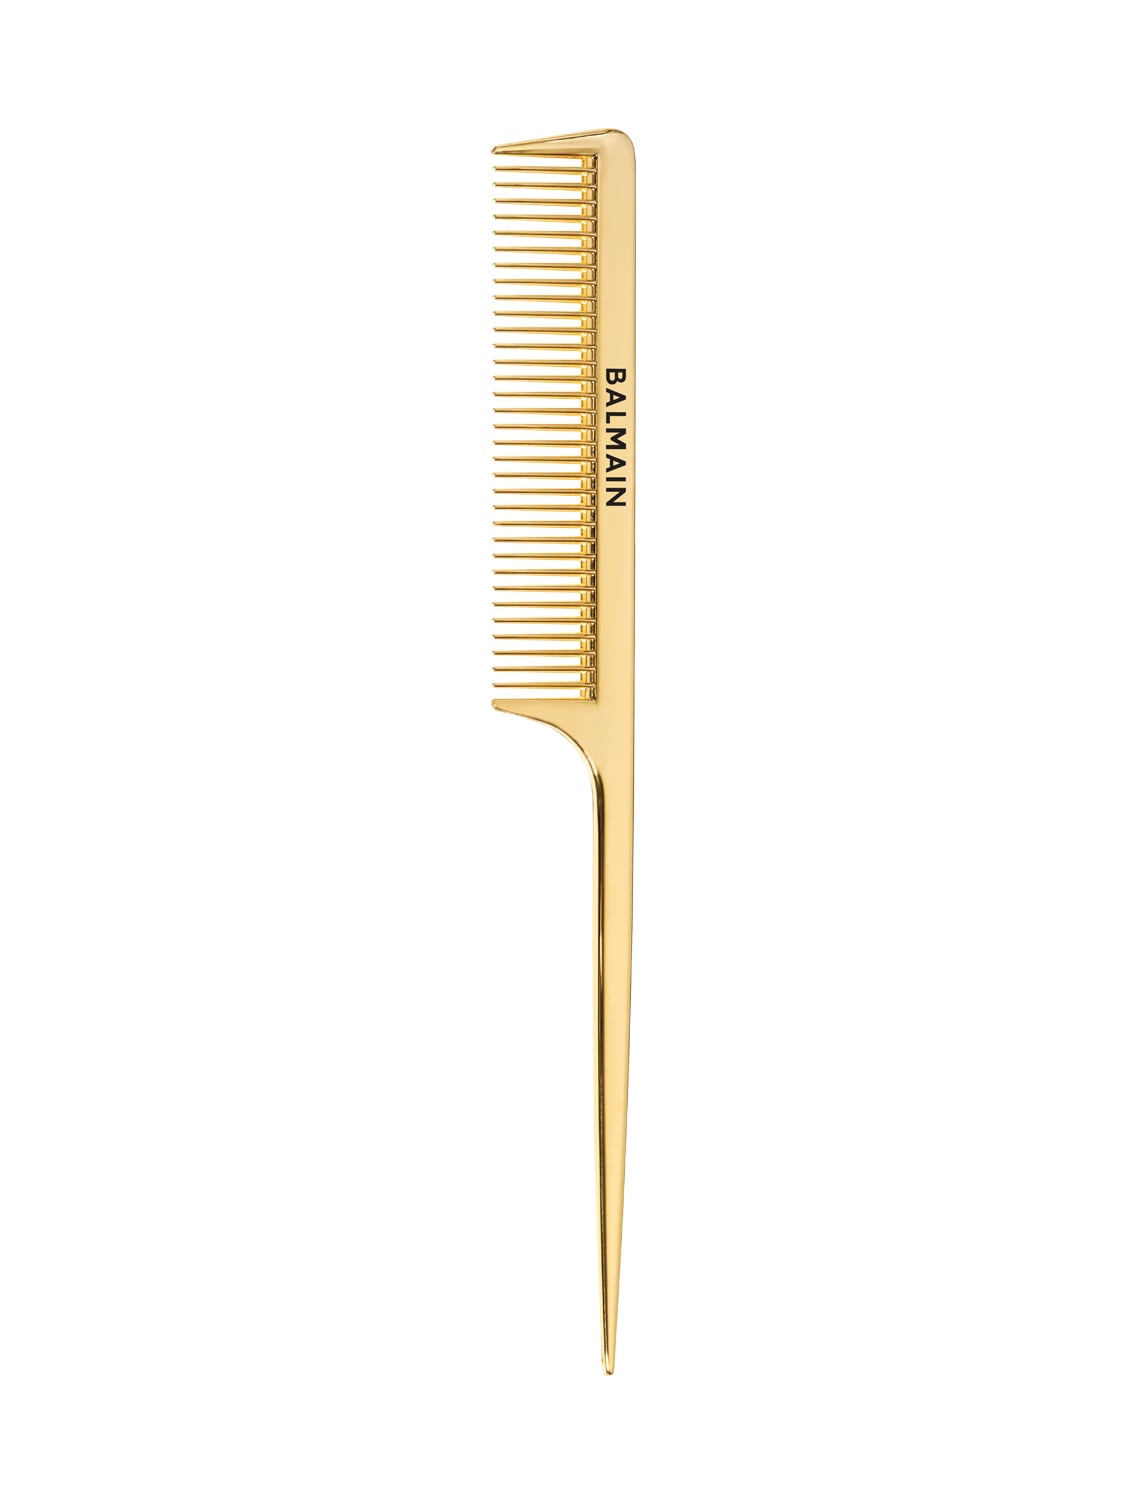 Image of Golden Tail Comb